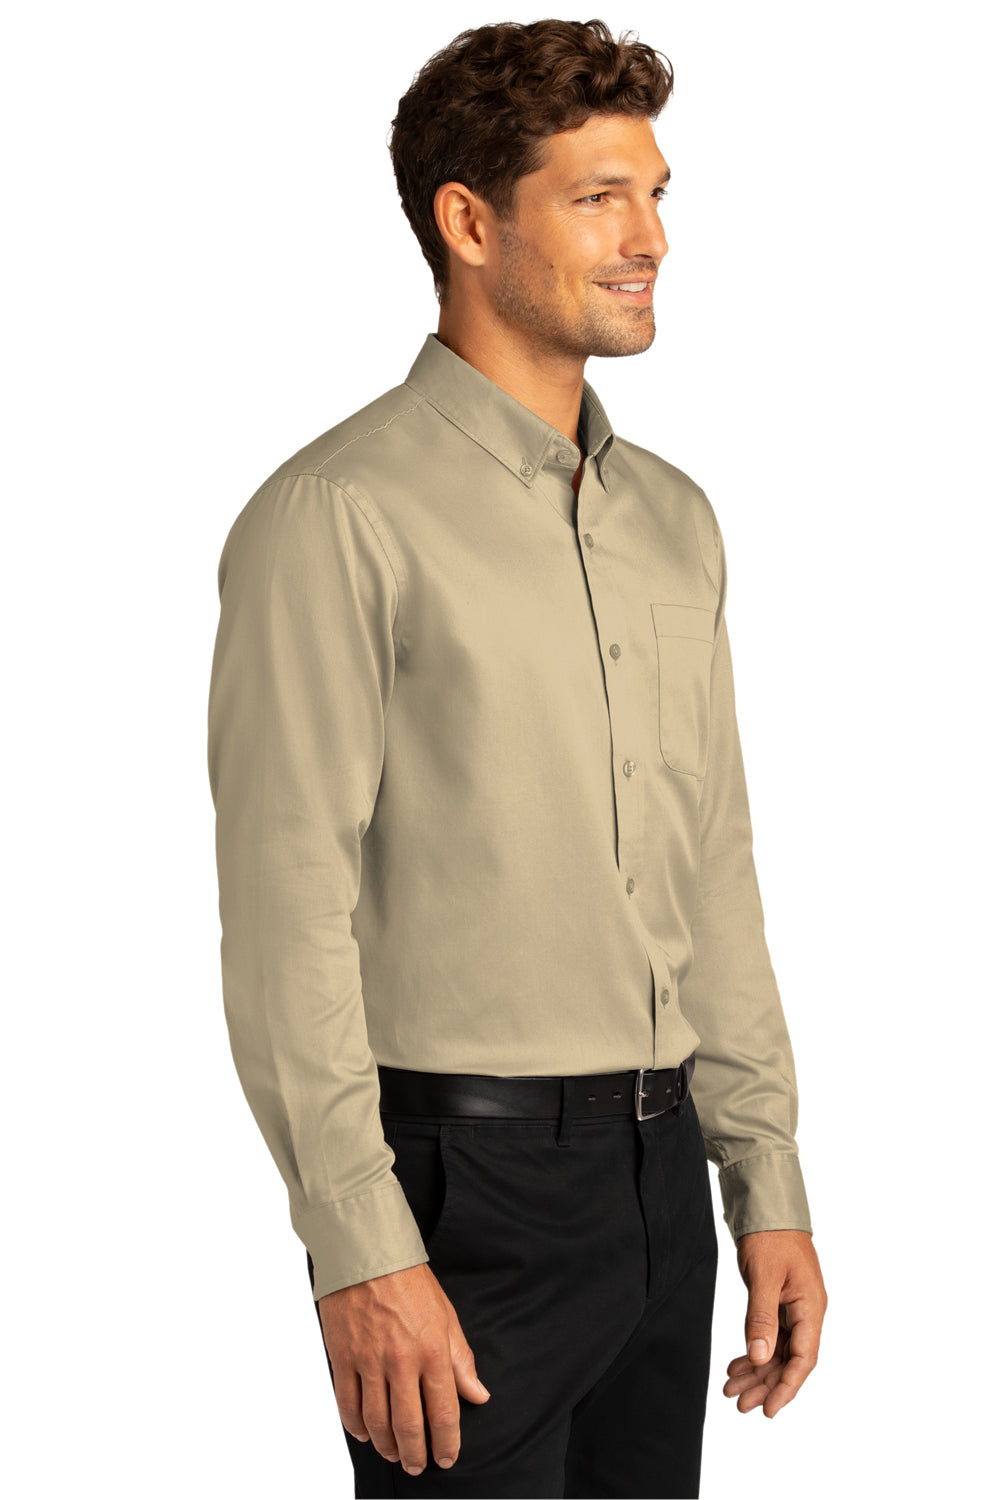 Port Authority W808 SuperPro Wrinkle Resistant React Long Sleeve Button Down Shirt w/ Pocket Wheat 3Q